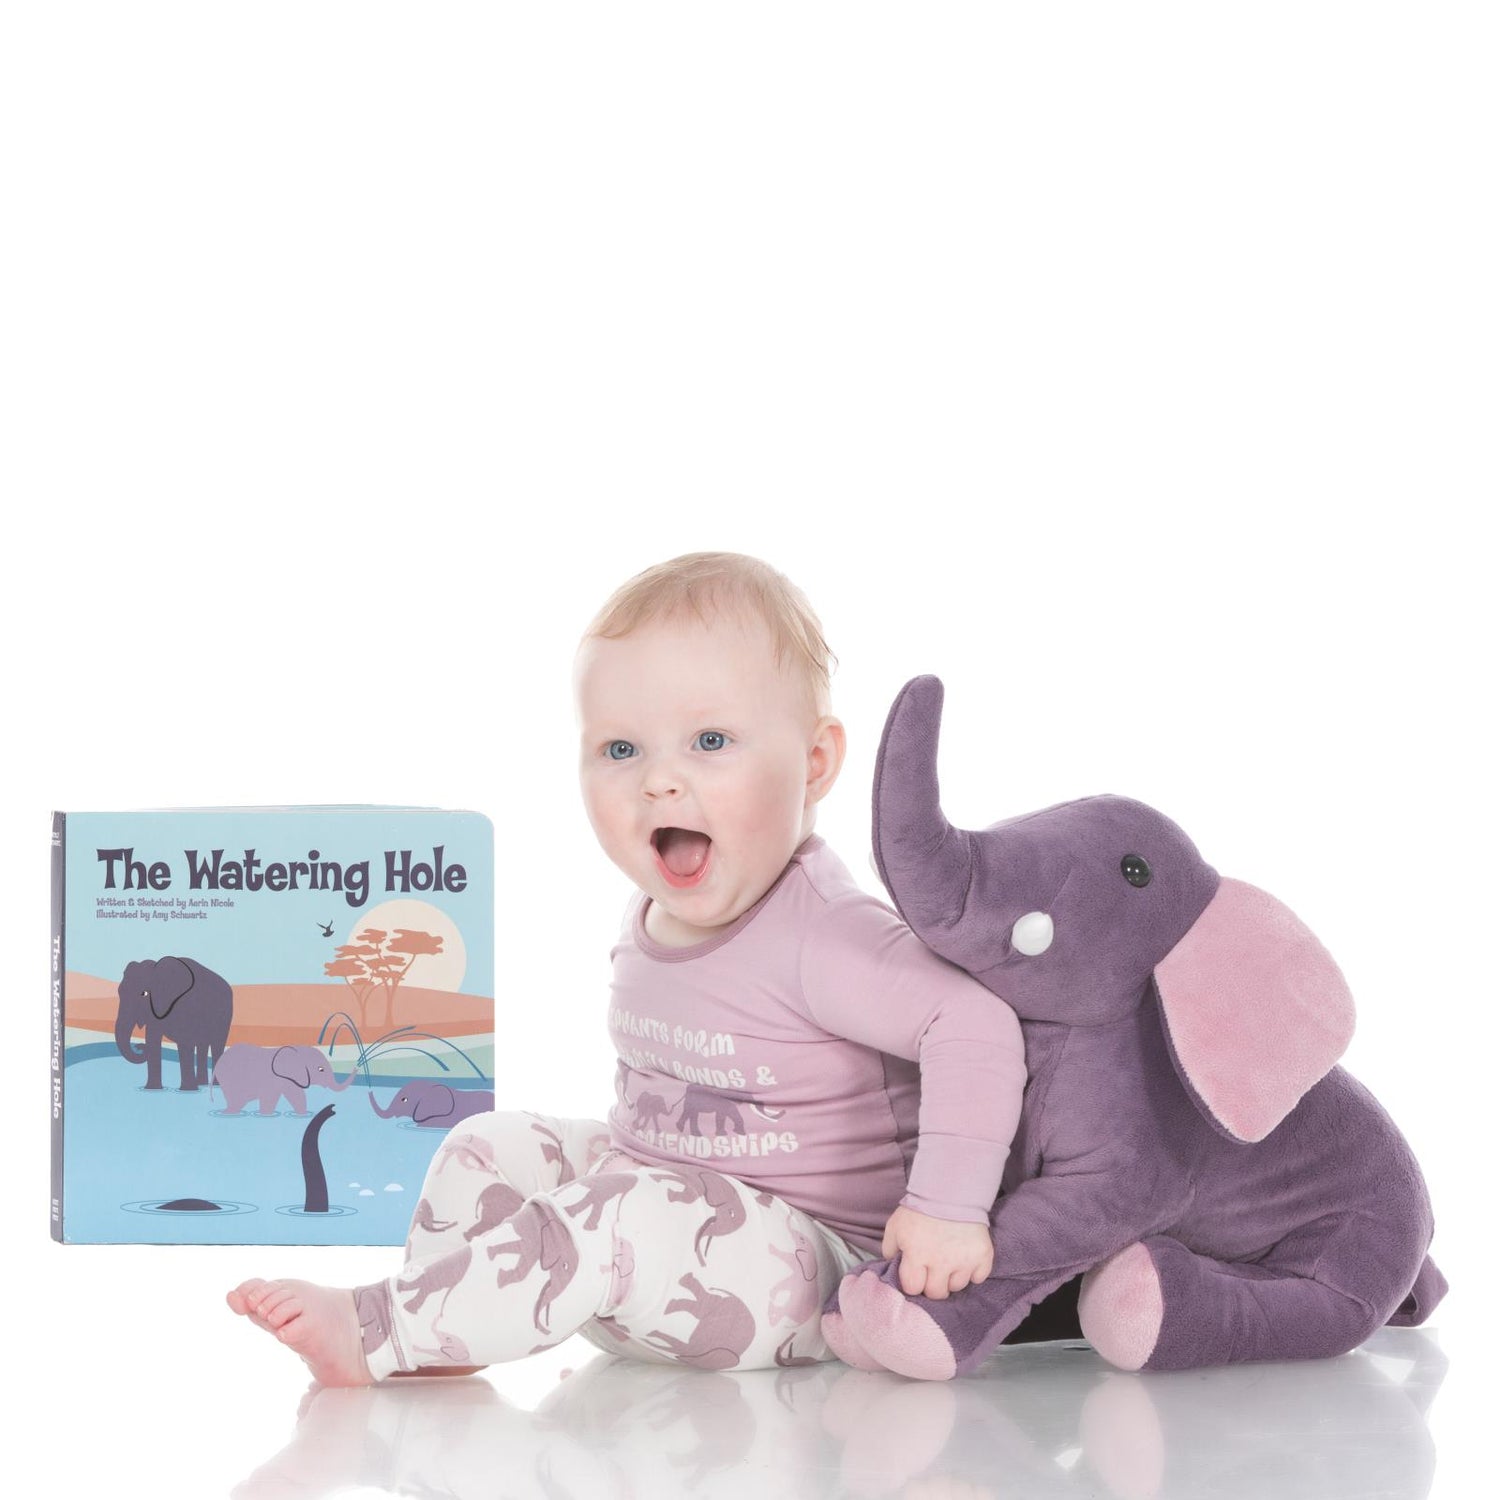 Book & Plush Combo in The Watering Hole with Mama Elephant Plush